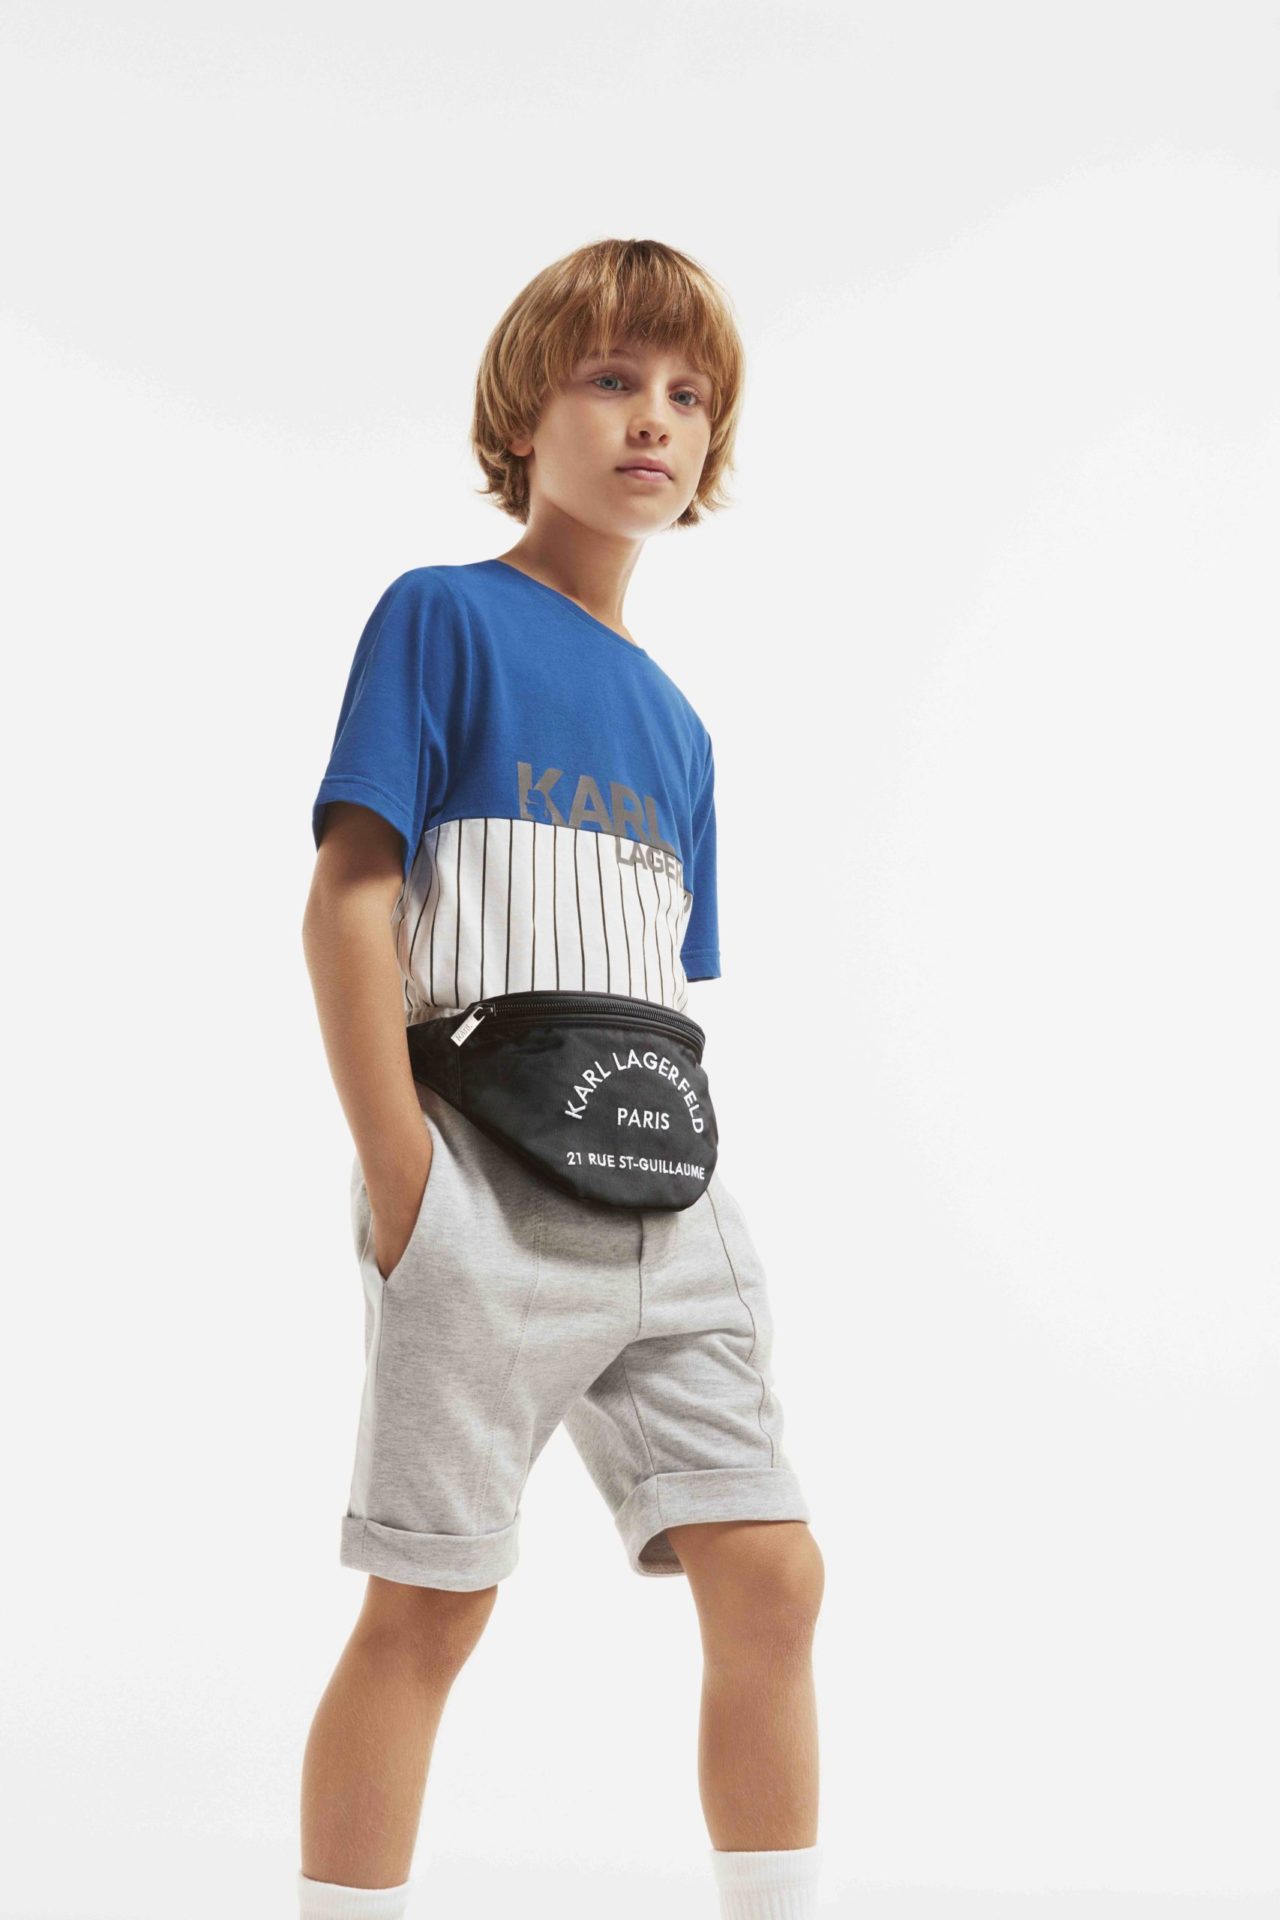 Easy to wear sports styling at Karl Lagerfeld childrenswear